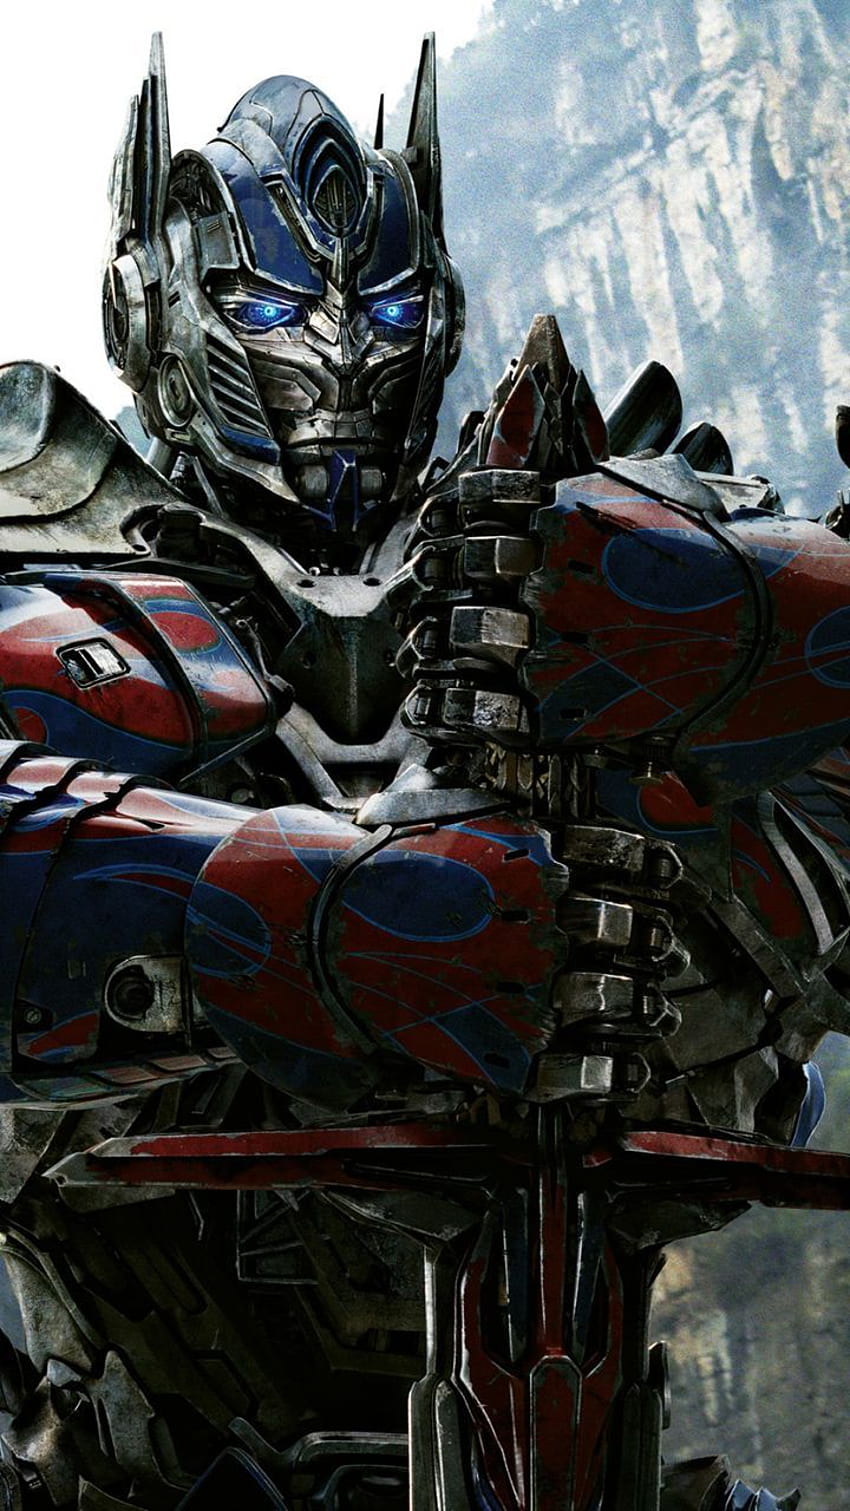 Transformers Age of Extinction für Android. Optimus prime , Optimus prime Transformatoren, Transformatoren optimus prime HD-Handy-Hintergrundbild